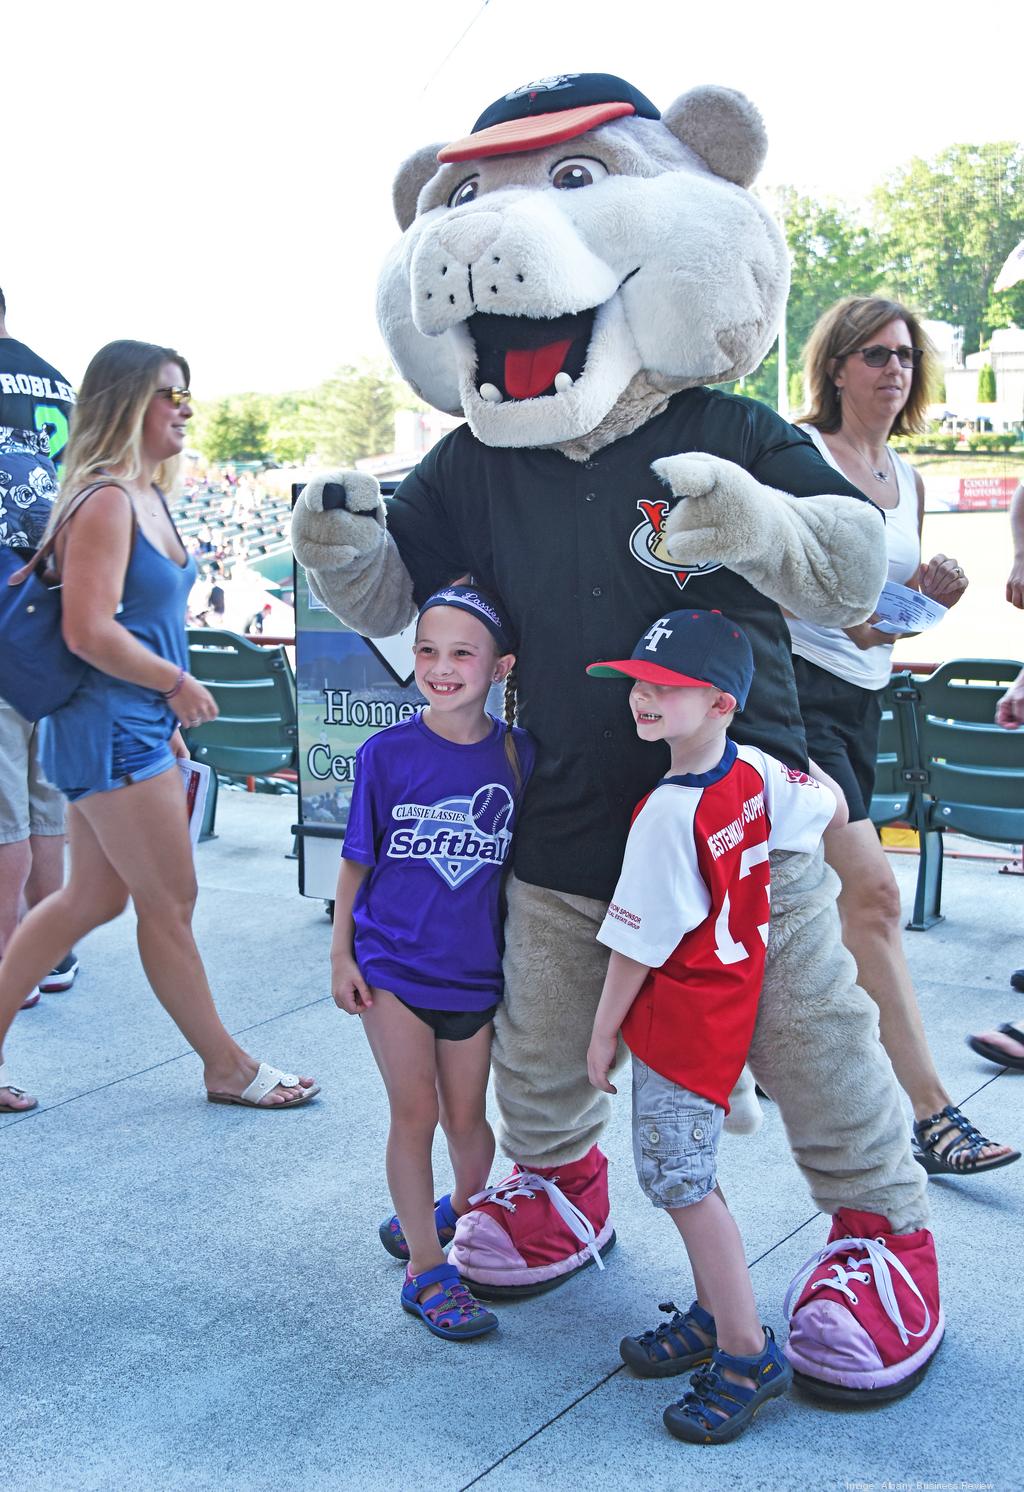 Scenes from the road: Staten Island, by Tri-City ValleyCats